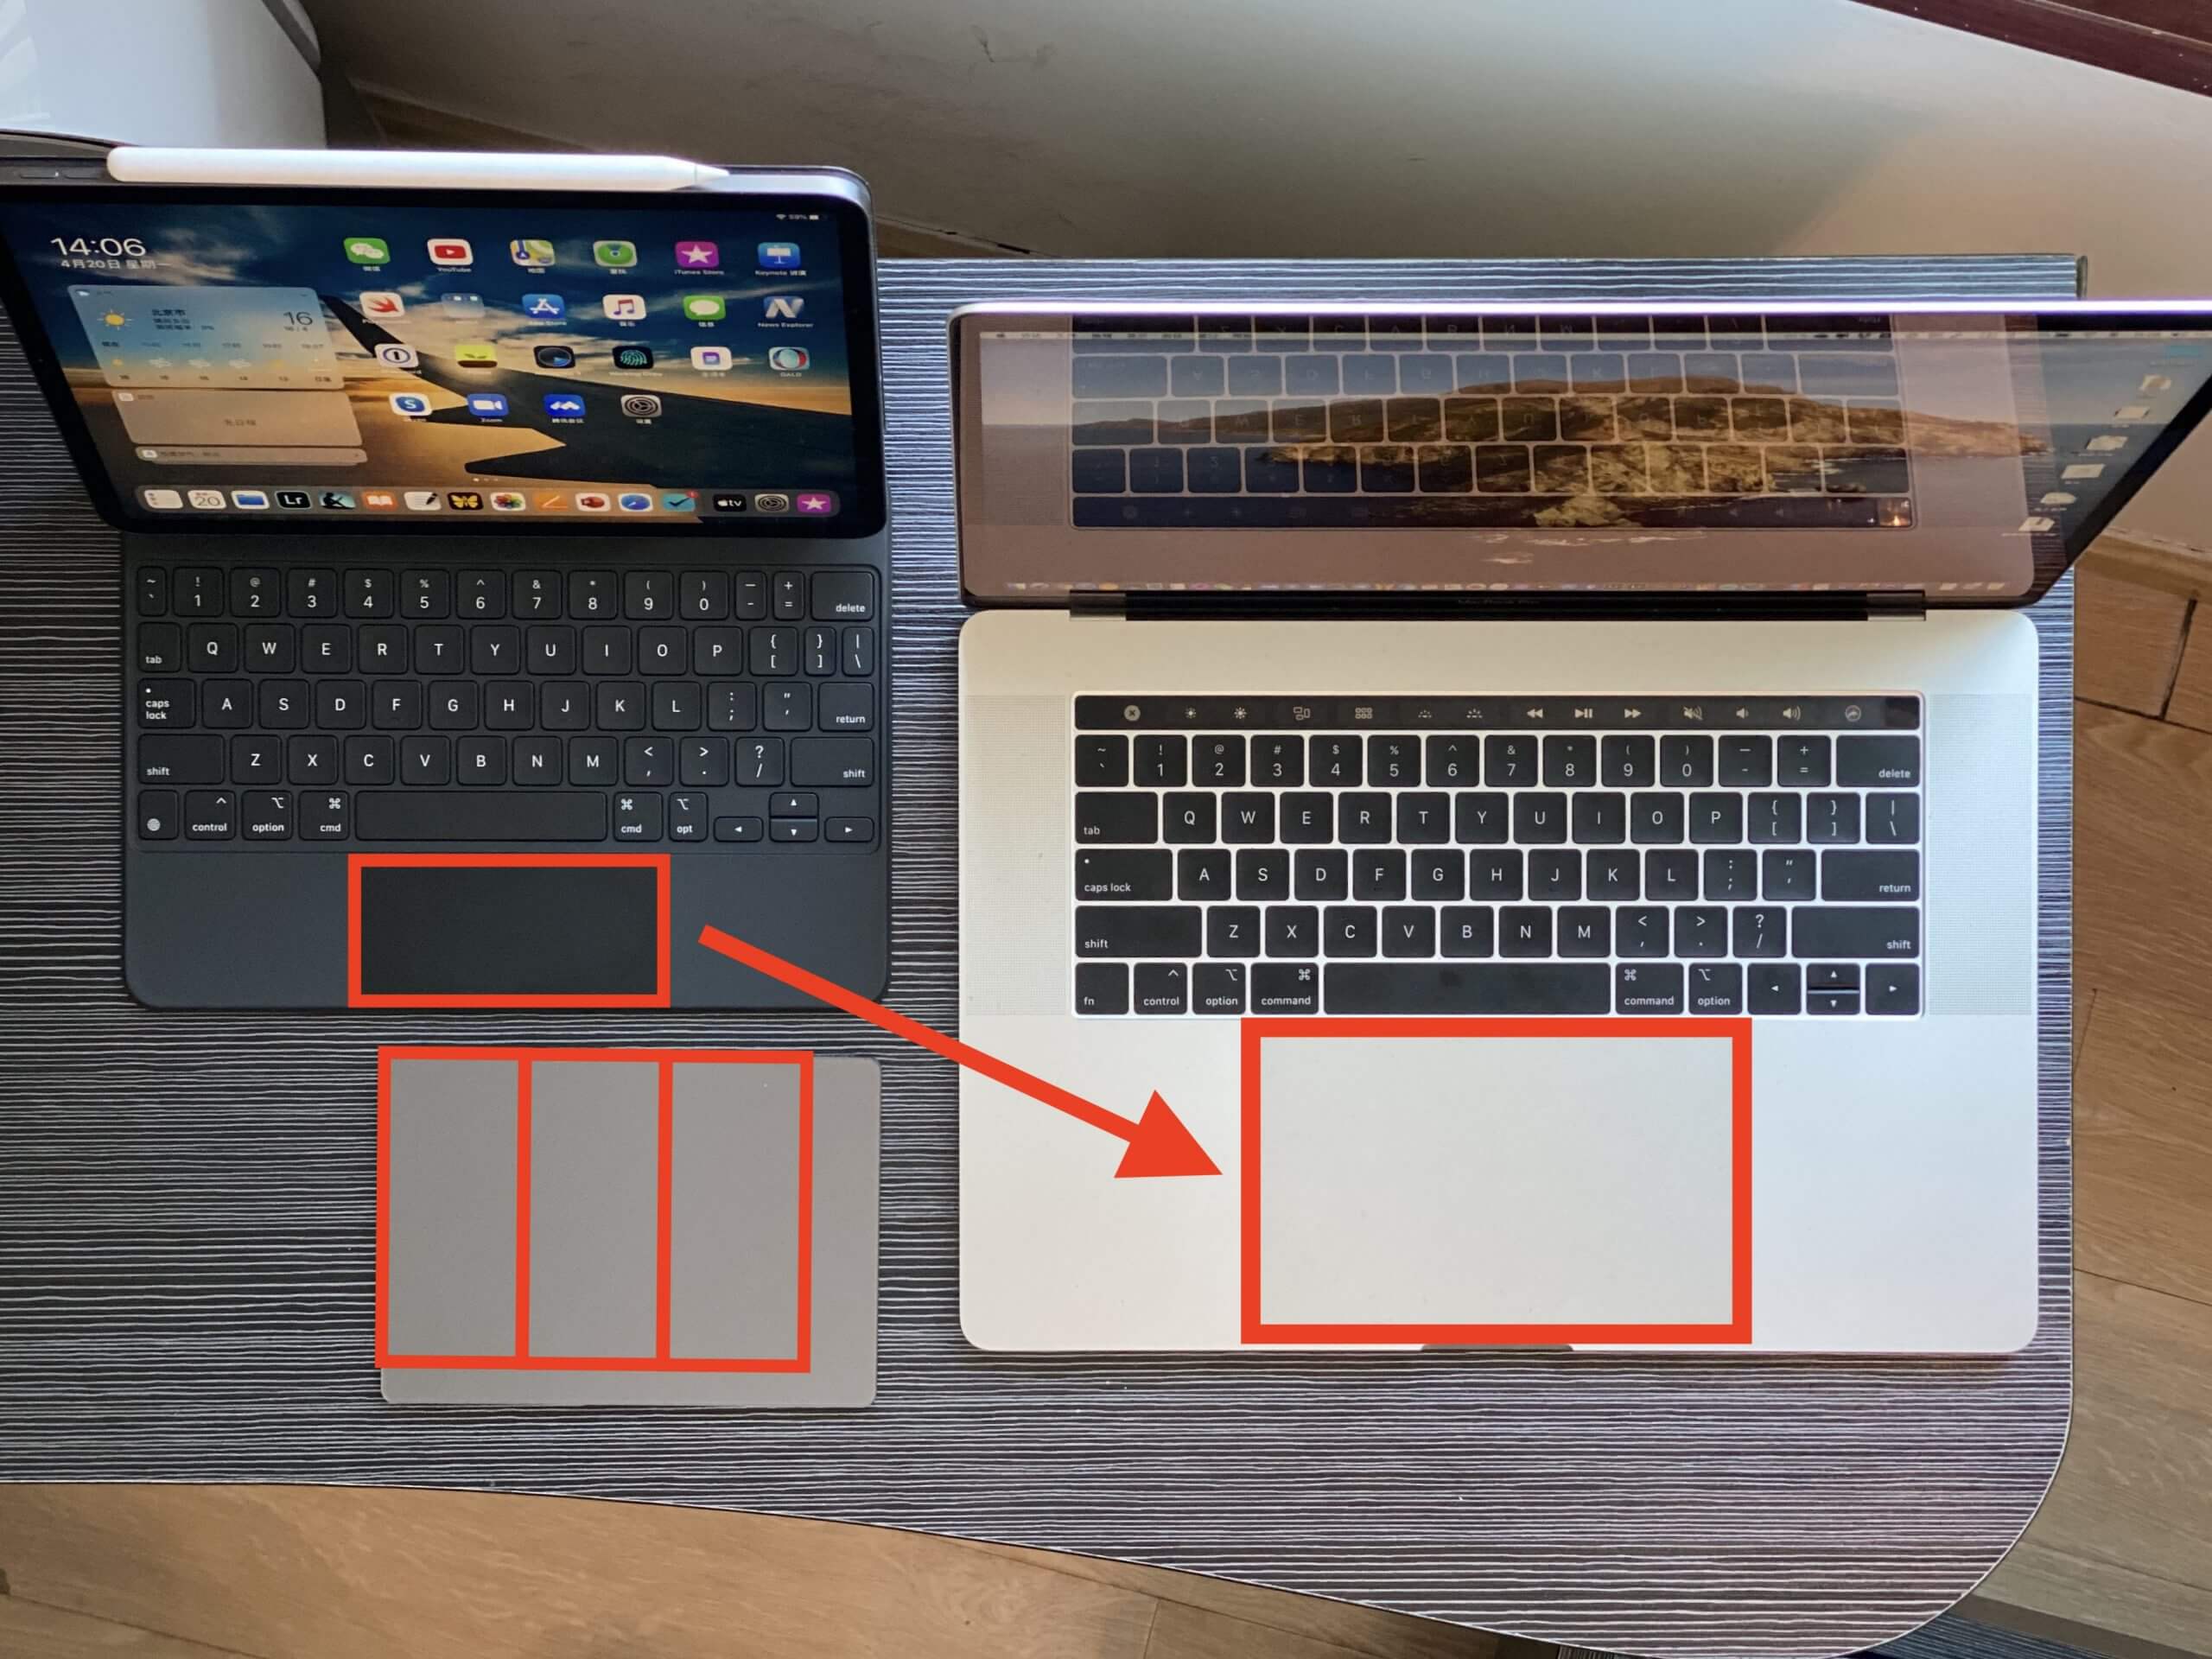 Comparison with the 2018 15-inch MacBook Pro (it can be clearly seen that the iPad version is roughly four times smaller)